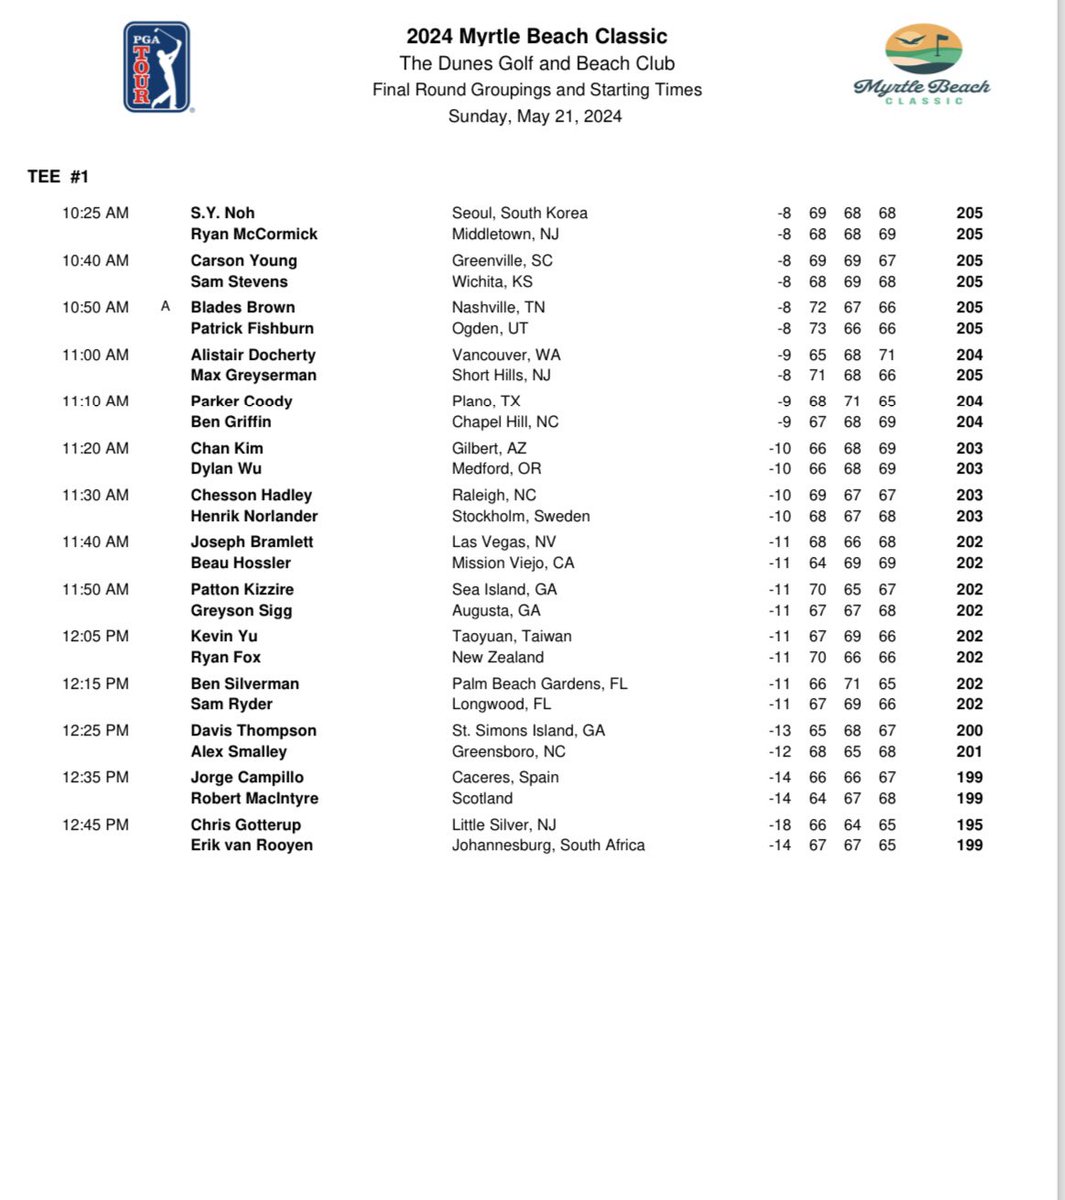 Pairings and starting times for the final round of the Myrtle Beach Classic